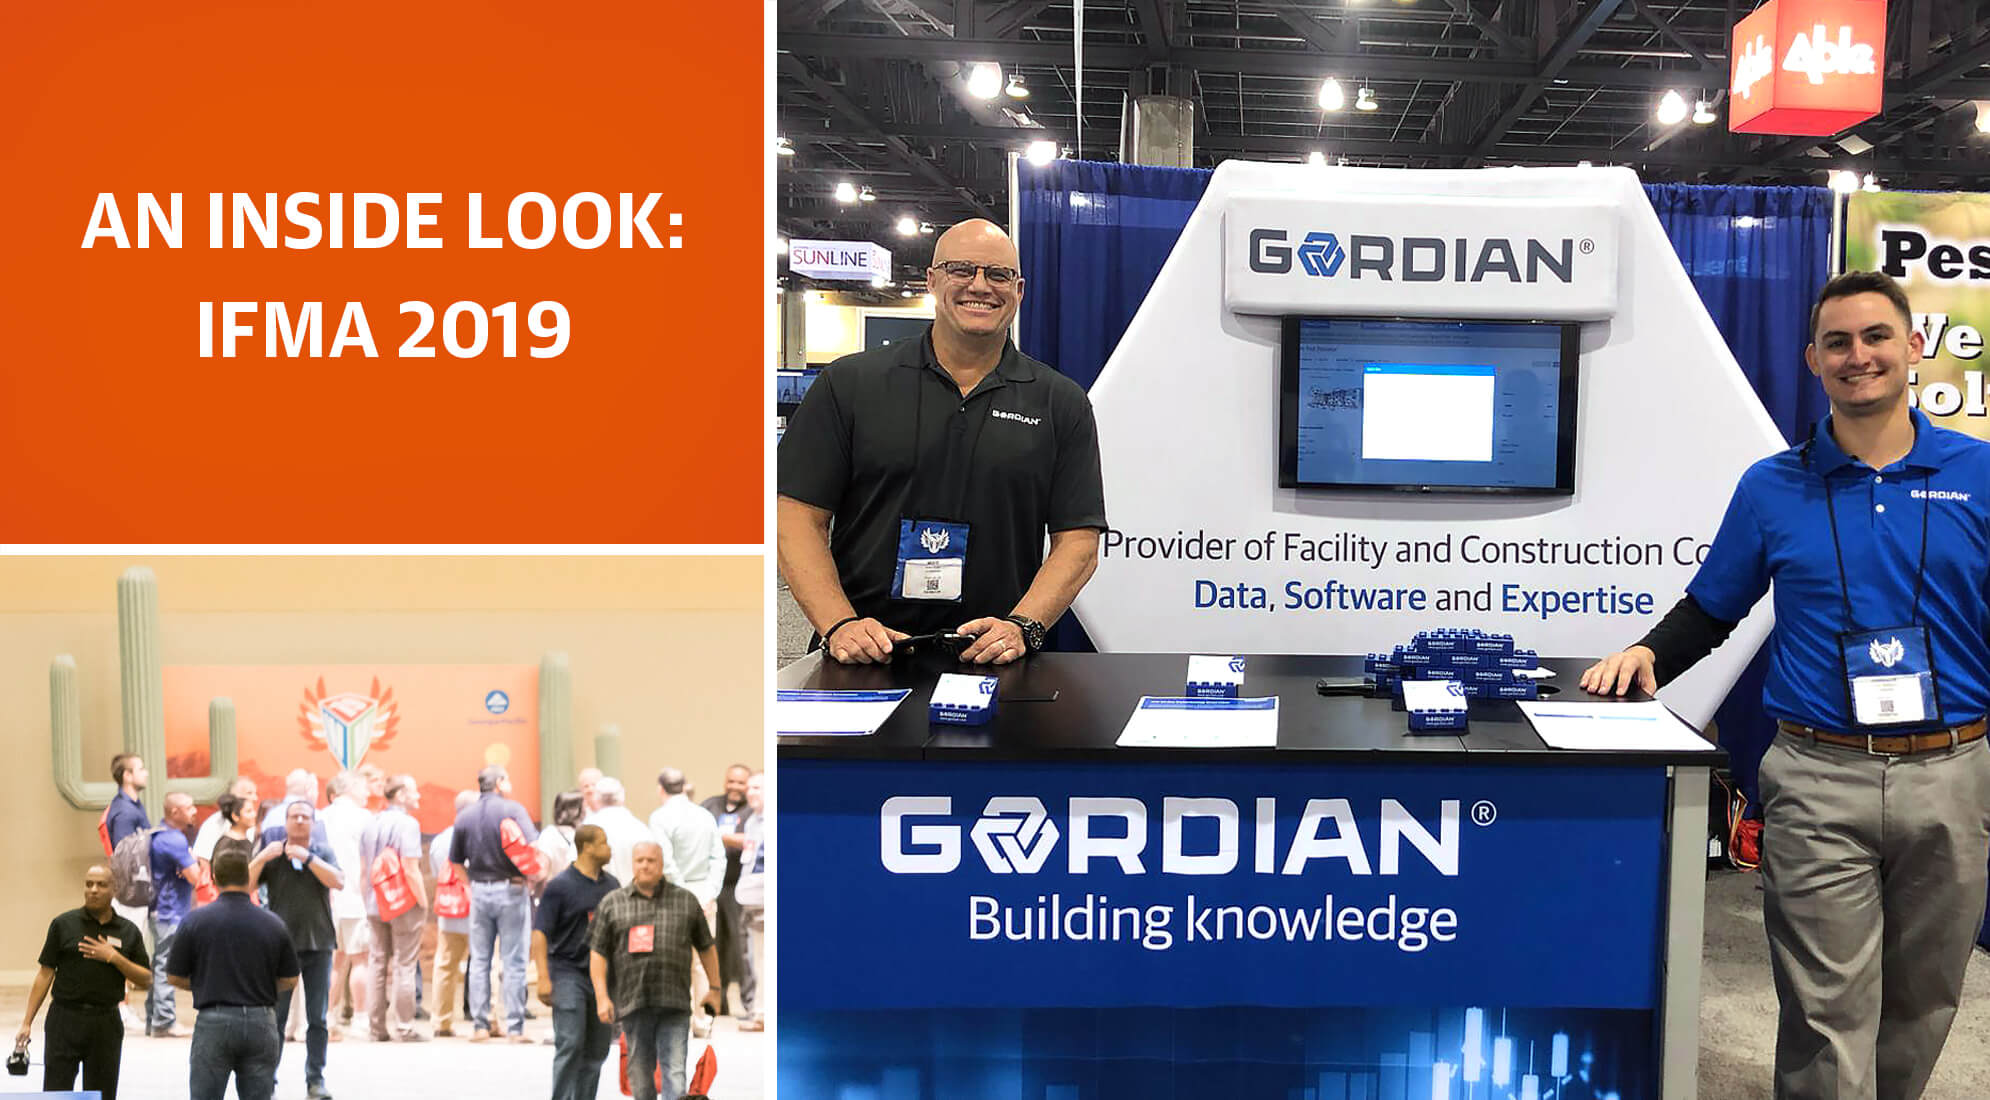 Gordian Exhibits at IFMA World Workplace 2019